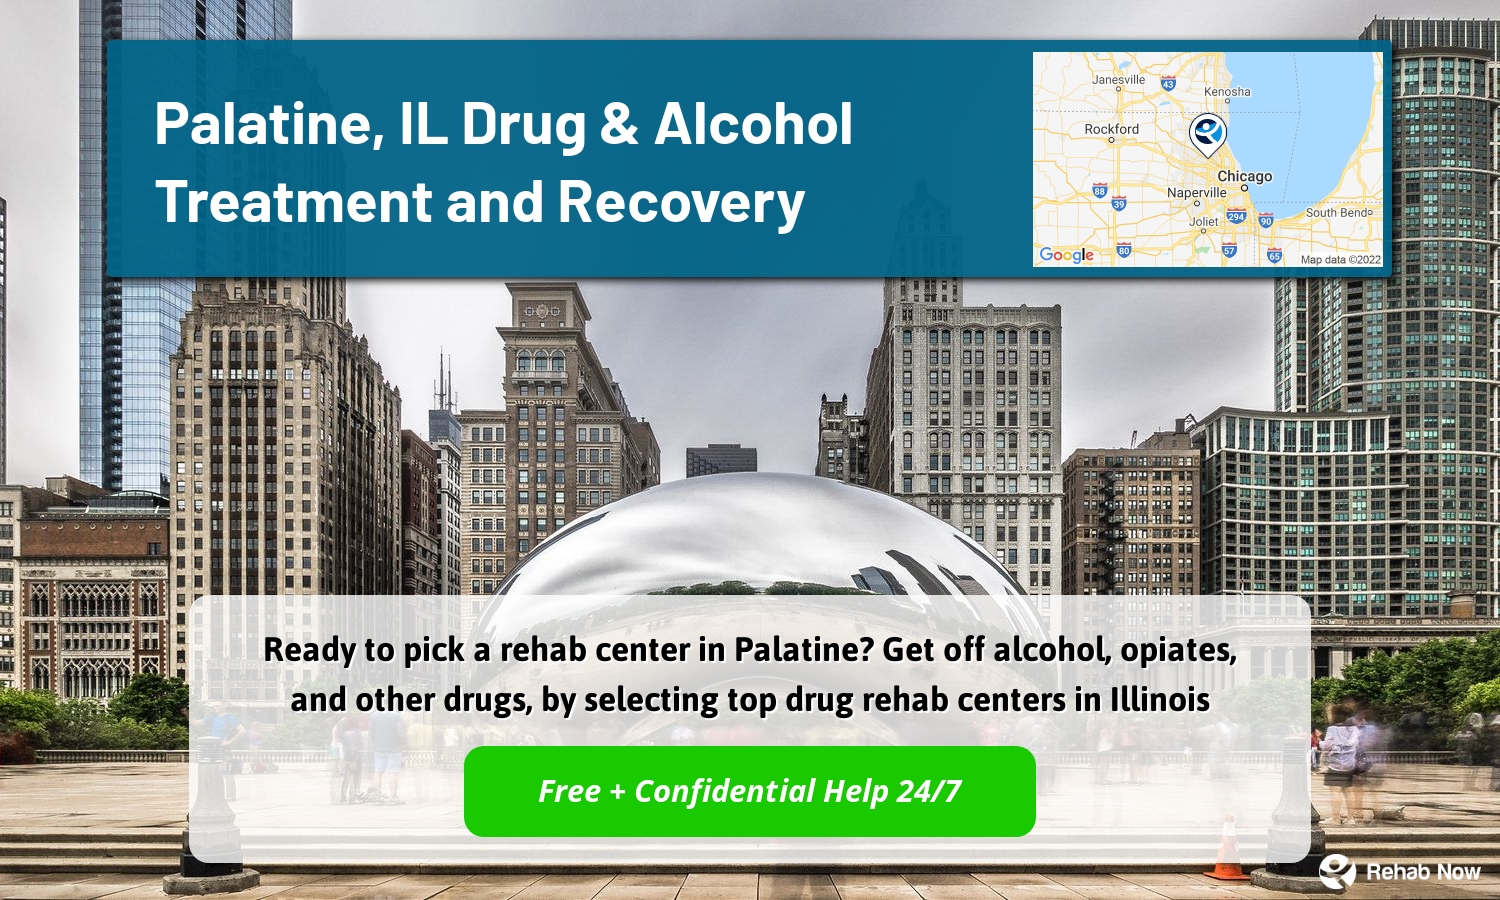 Ready to pick a rehab center in Palatine? Get off alcohol, opiates, and other drugs, by selecting top drug rehab centers in Illinois